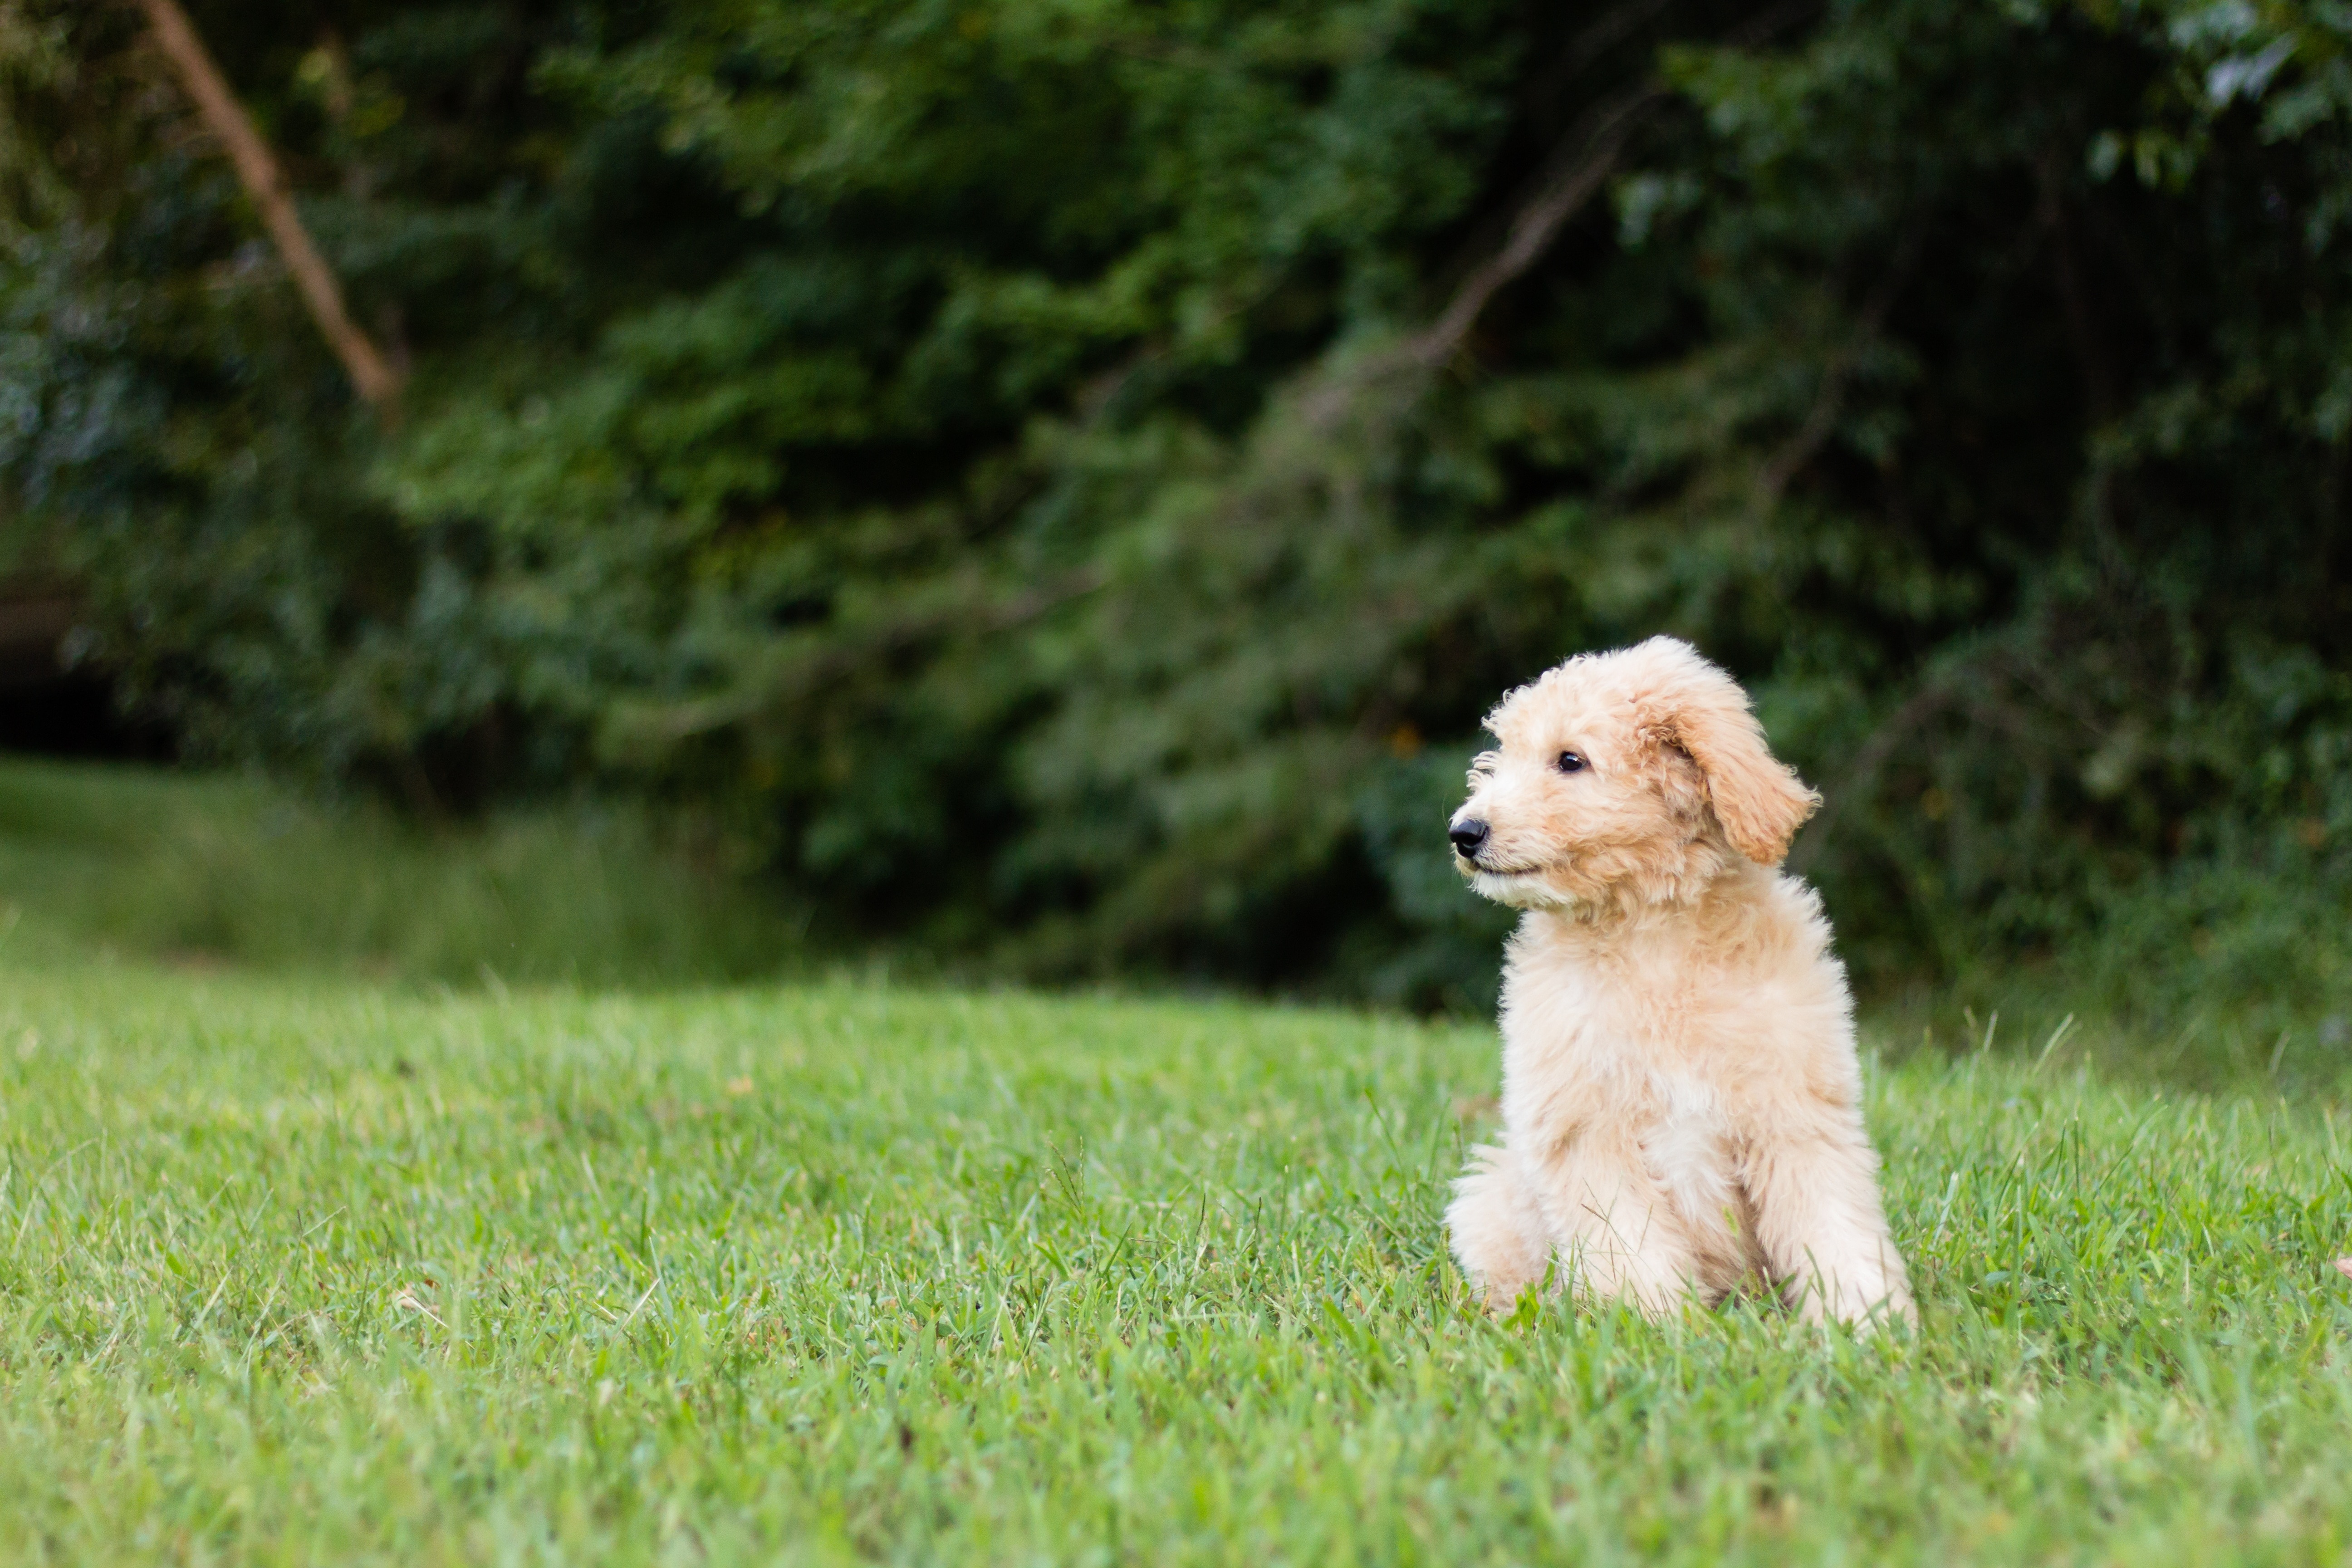 tan medium coated puppy surrounded by green grass